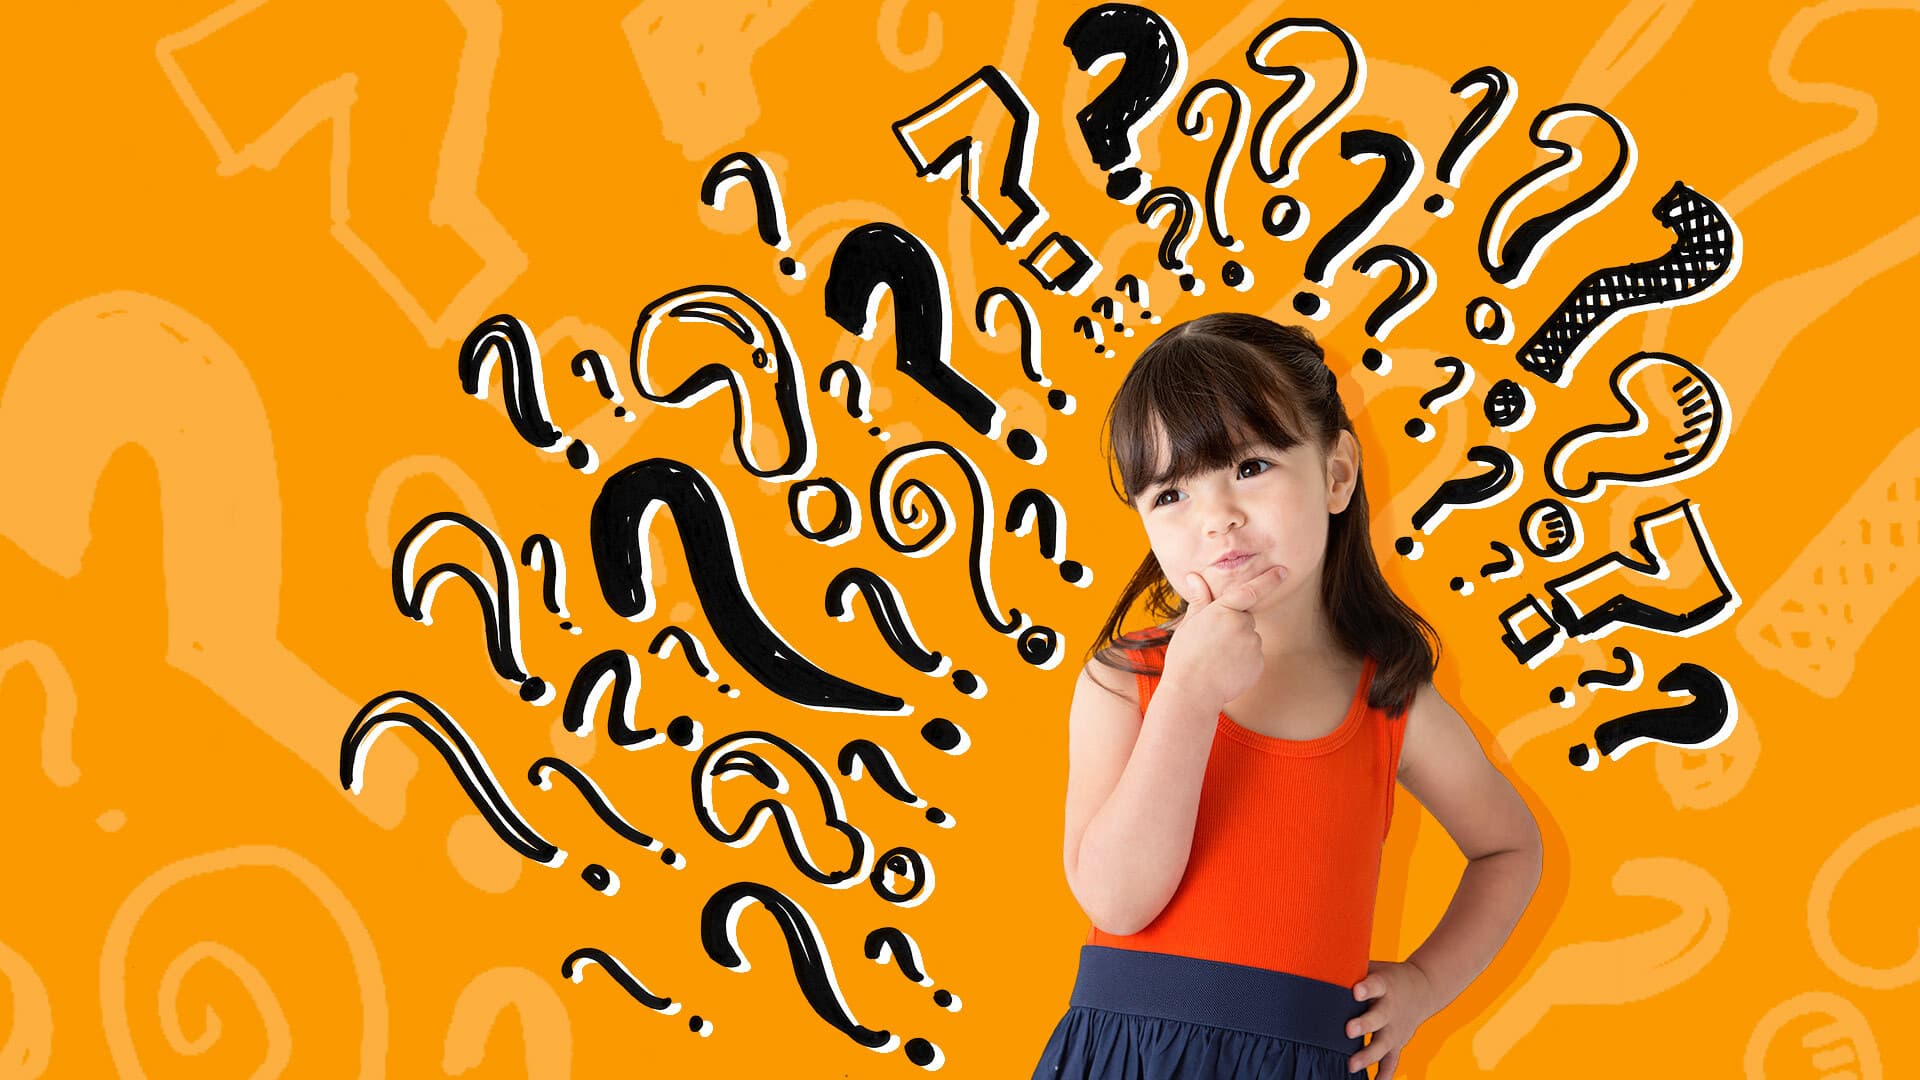 Girl surrounded by illustrated question marks